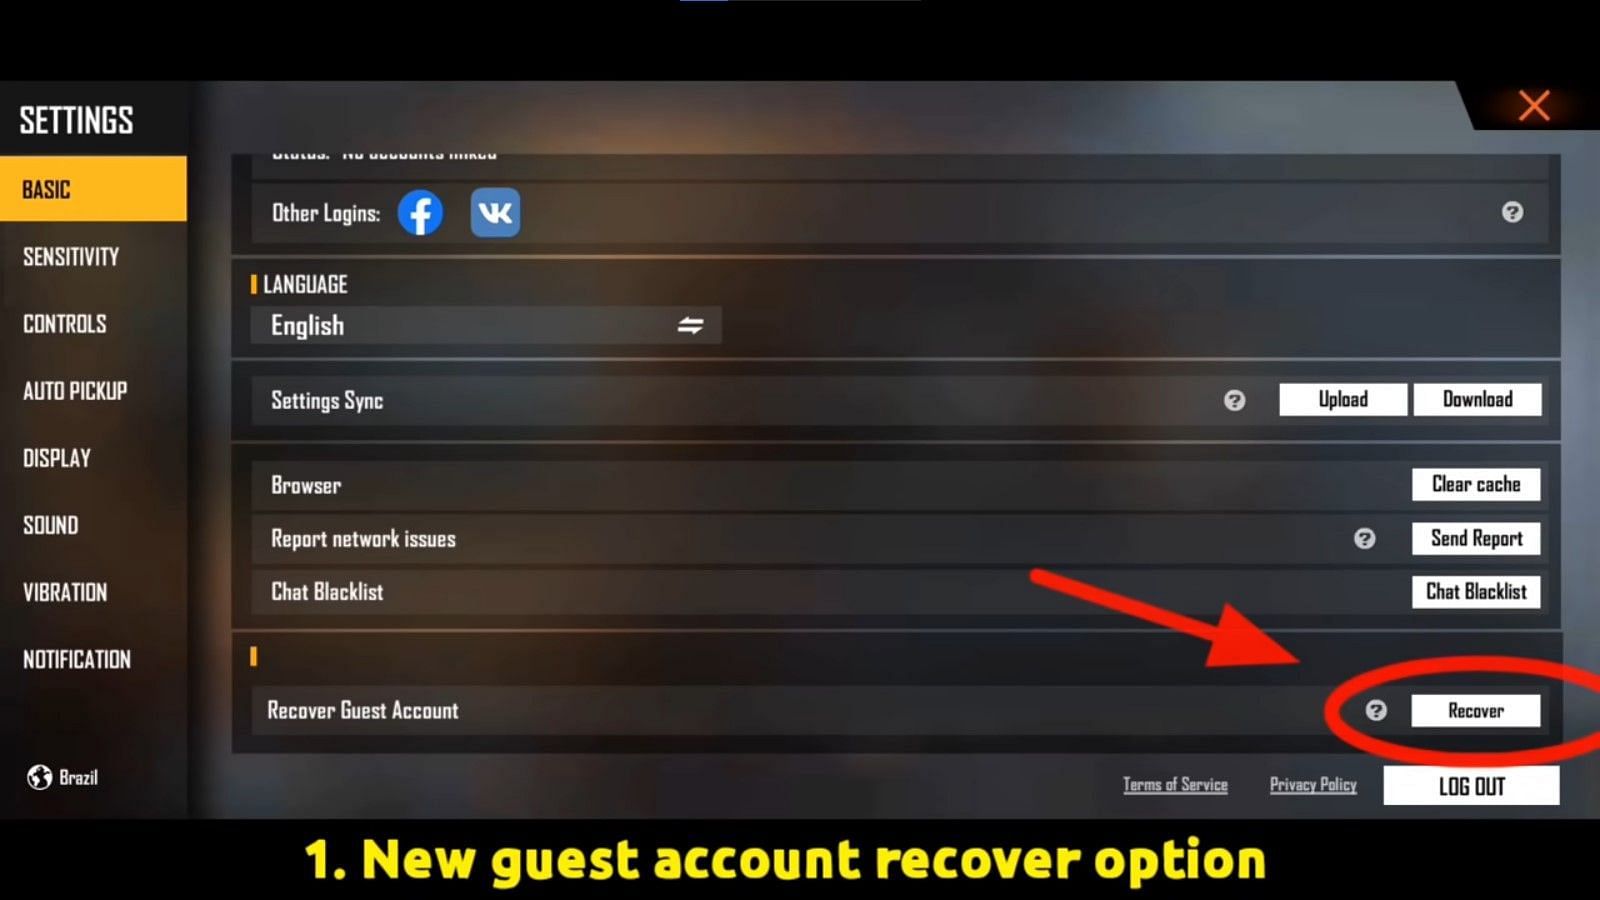 This option will help users recover their guest accounts (Image via BrOkEnJoYsTiCk/YouTube)